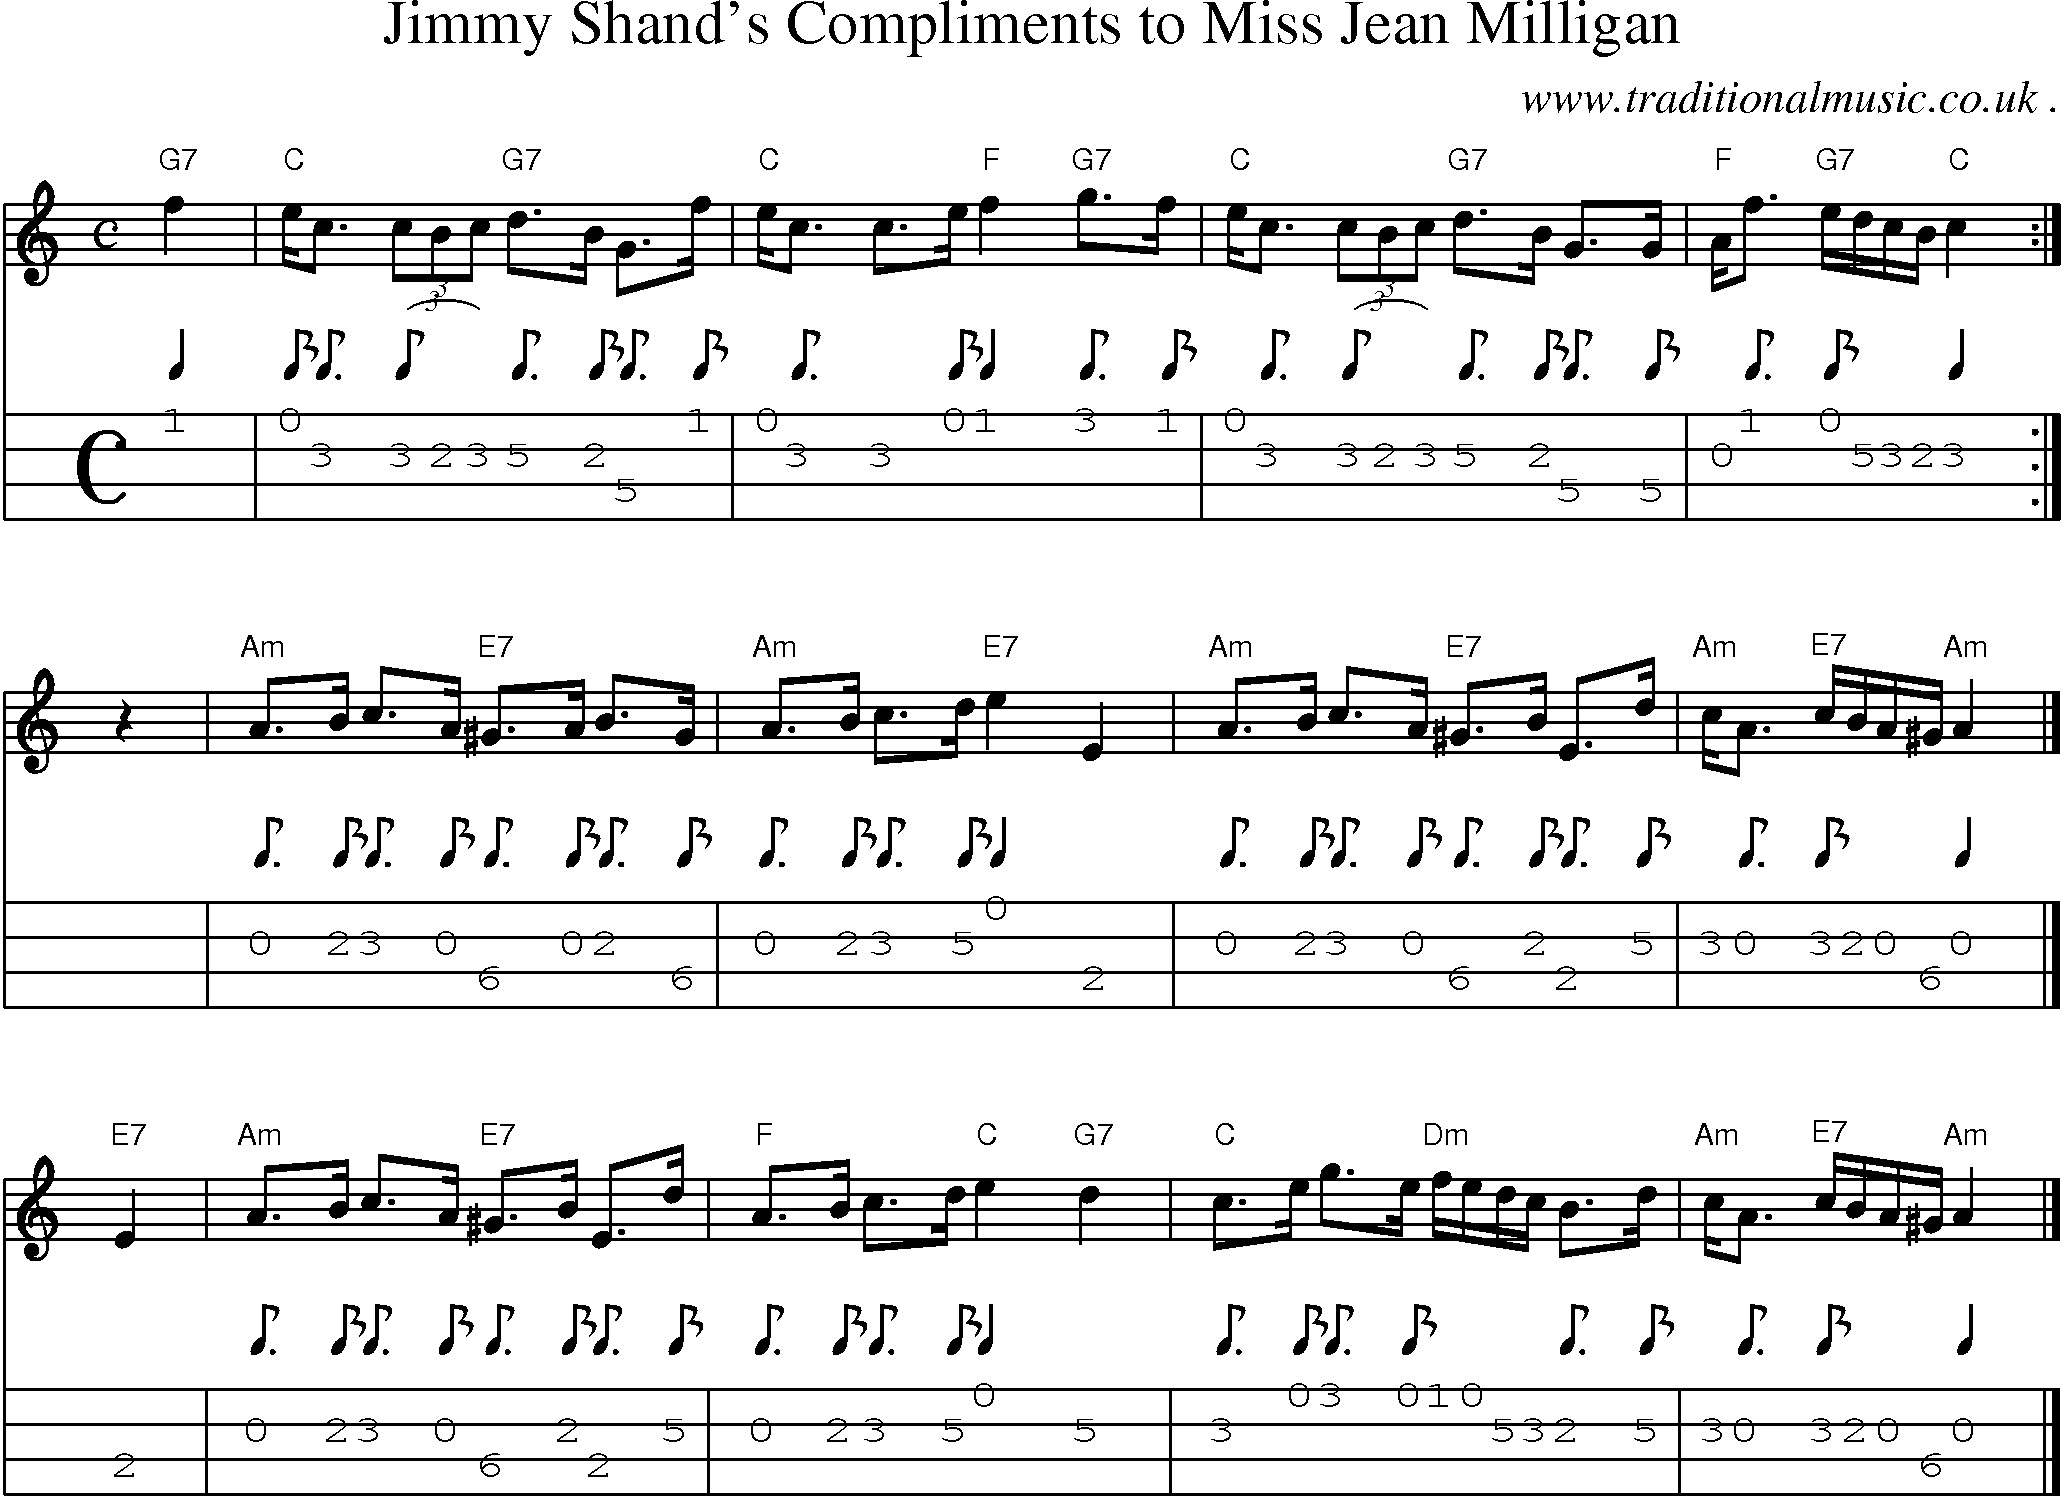 Sheet-music  score, Chords and Mandolin Tabs for Jimmy Shands Compliments To Miss Jean Milligan